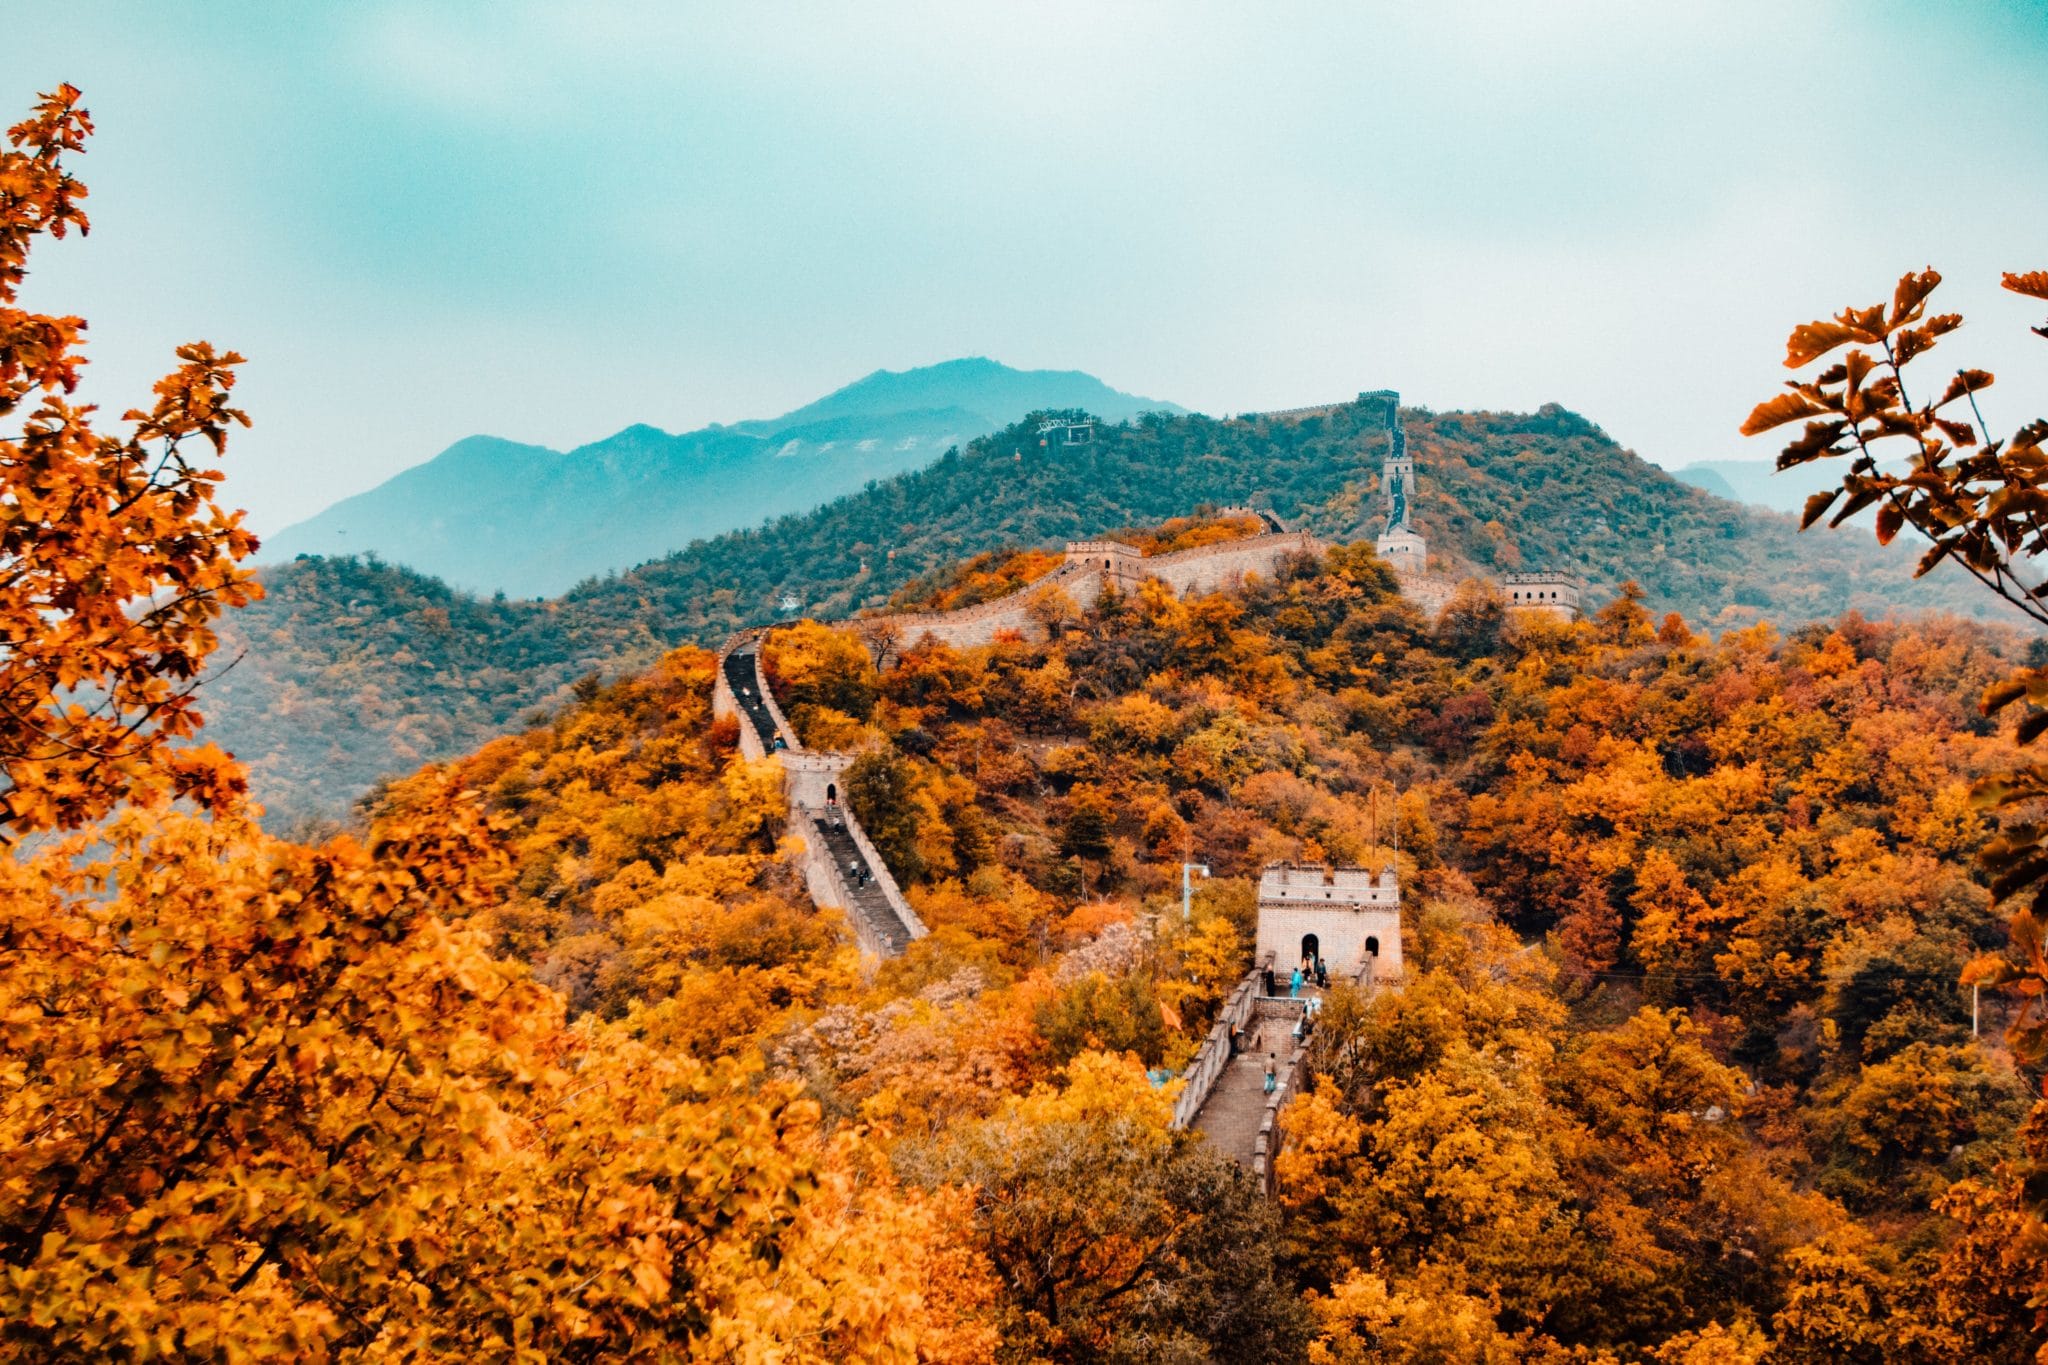 The view from above the great wall of China in Autumn.